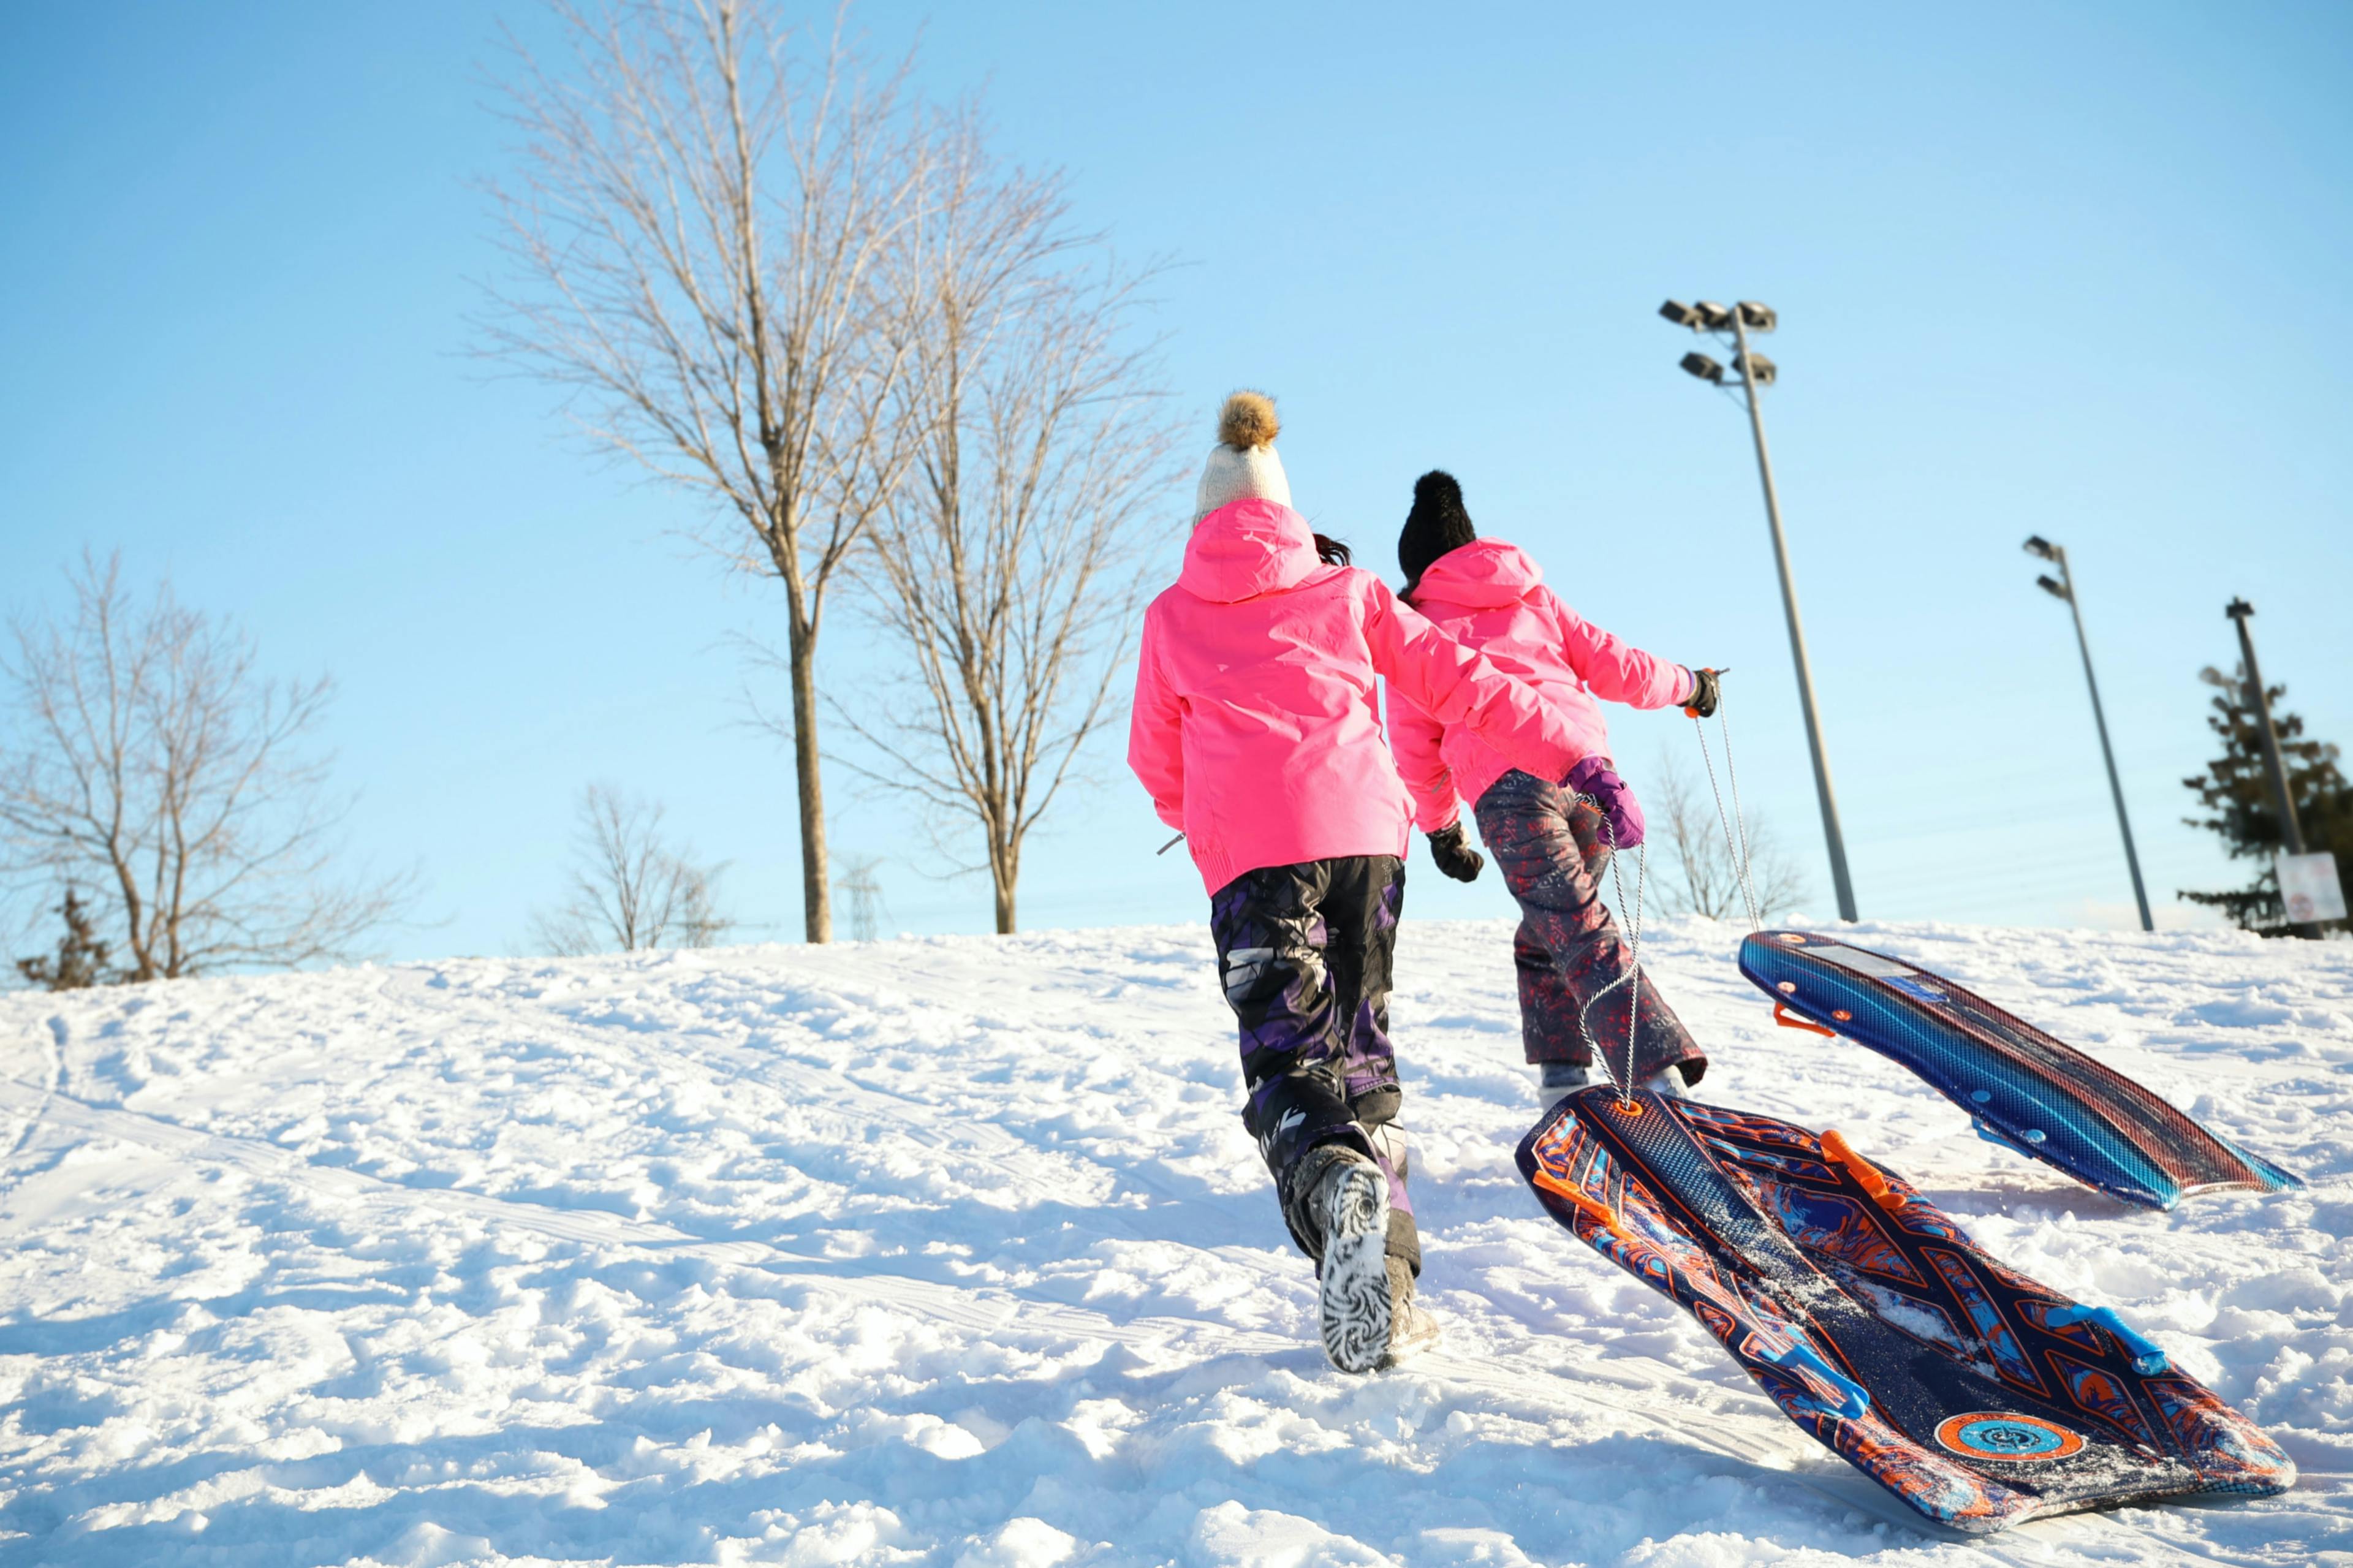 Children having fun in the snow with sledges